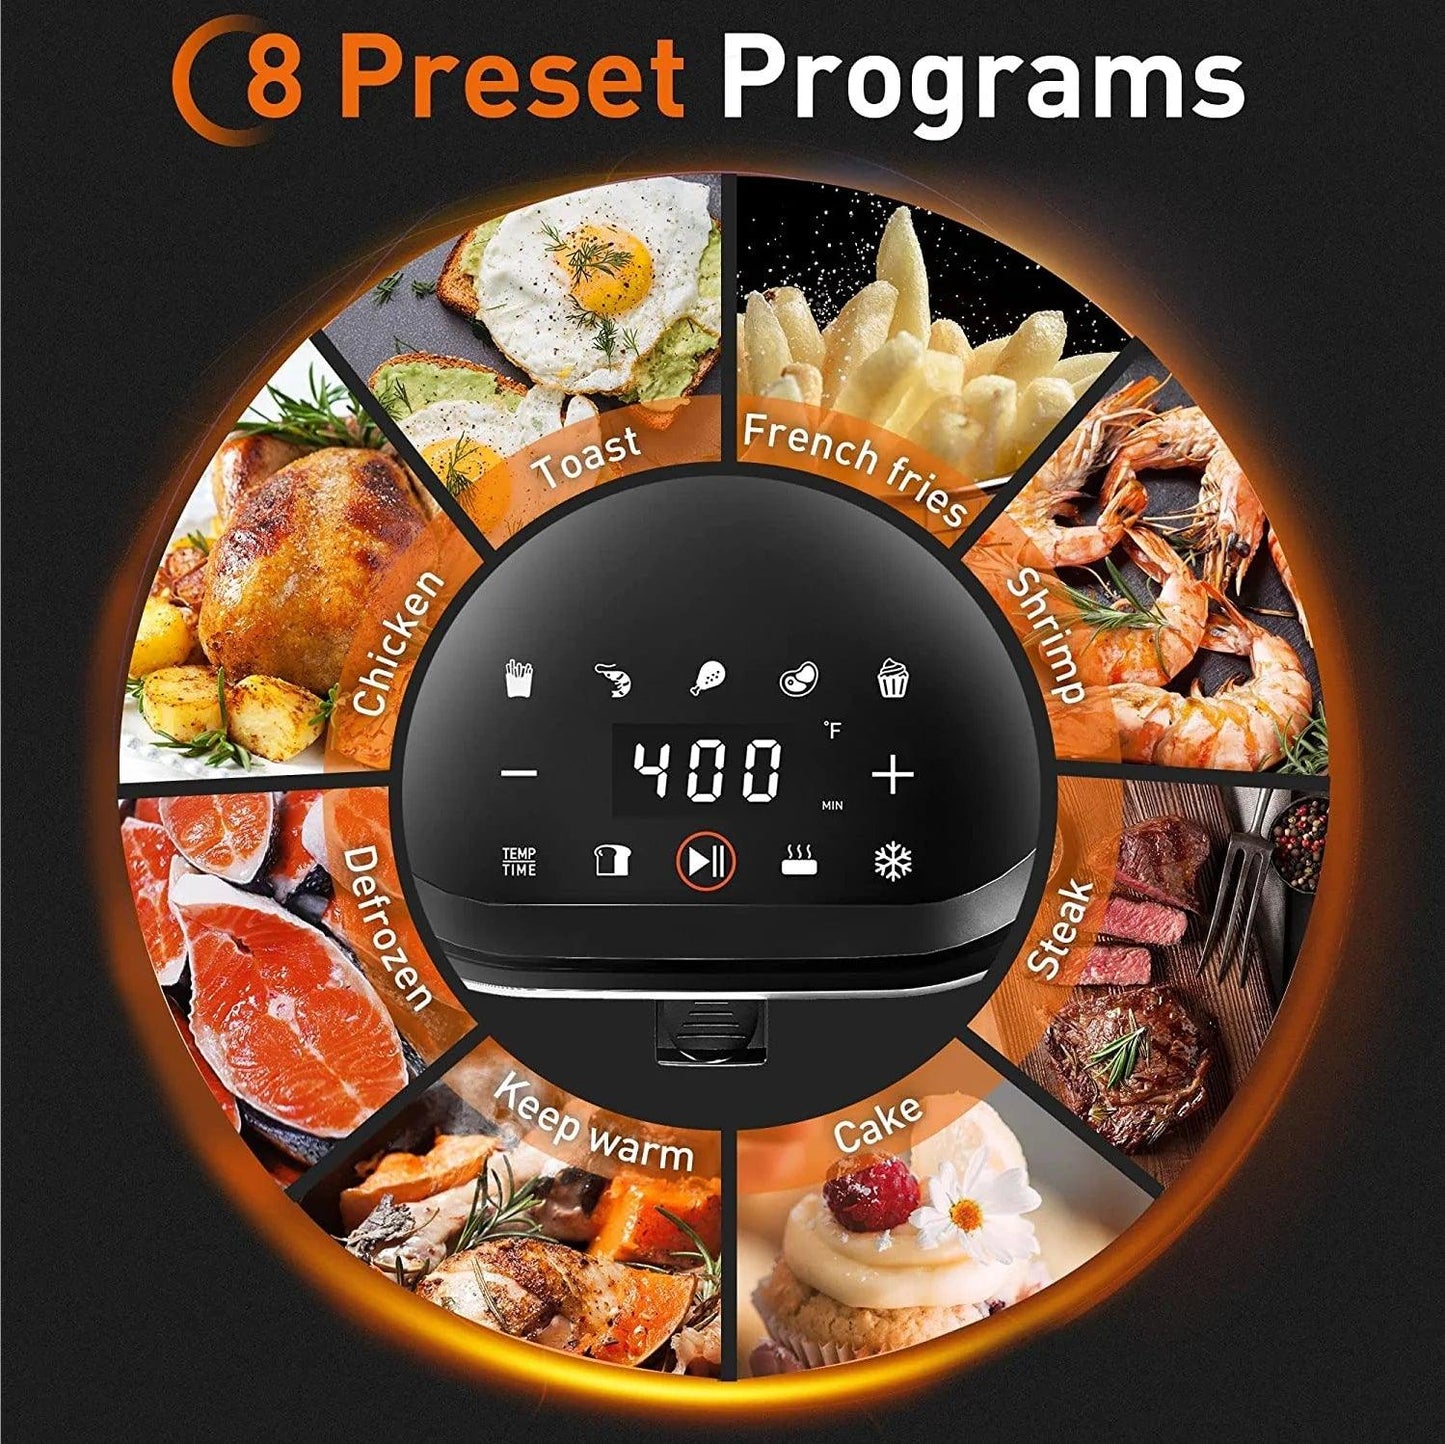 JOYOUNG Air Fryer K45-VF-571, LED One Touch Screen,8 in 1, 4.8Qt AirFryer, 93% less fat, Hot Oven Cooker with ℃ to ℉ Switch, Nonstick Basket